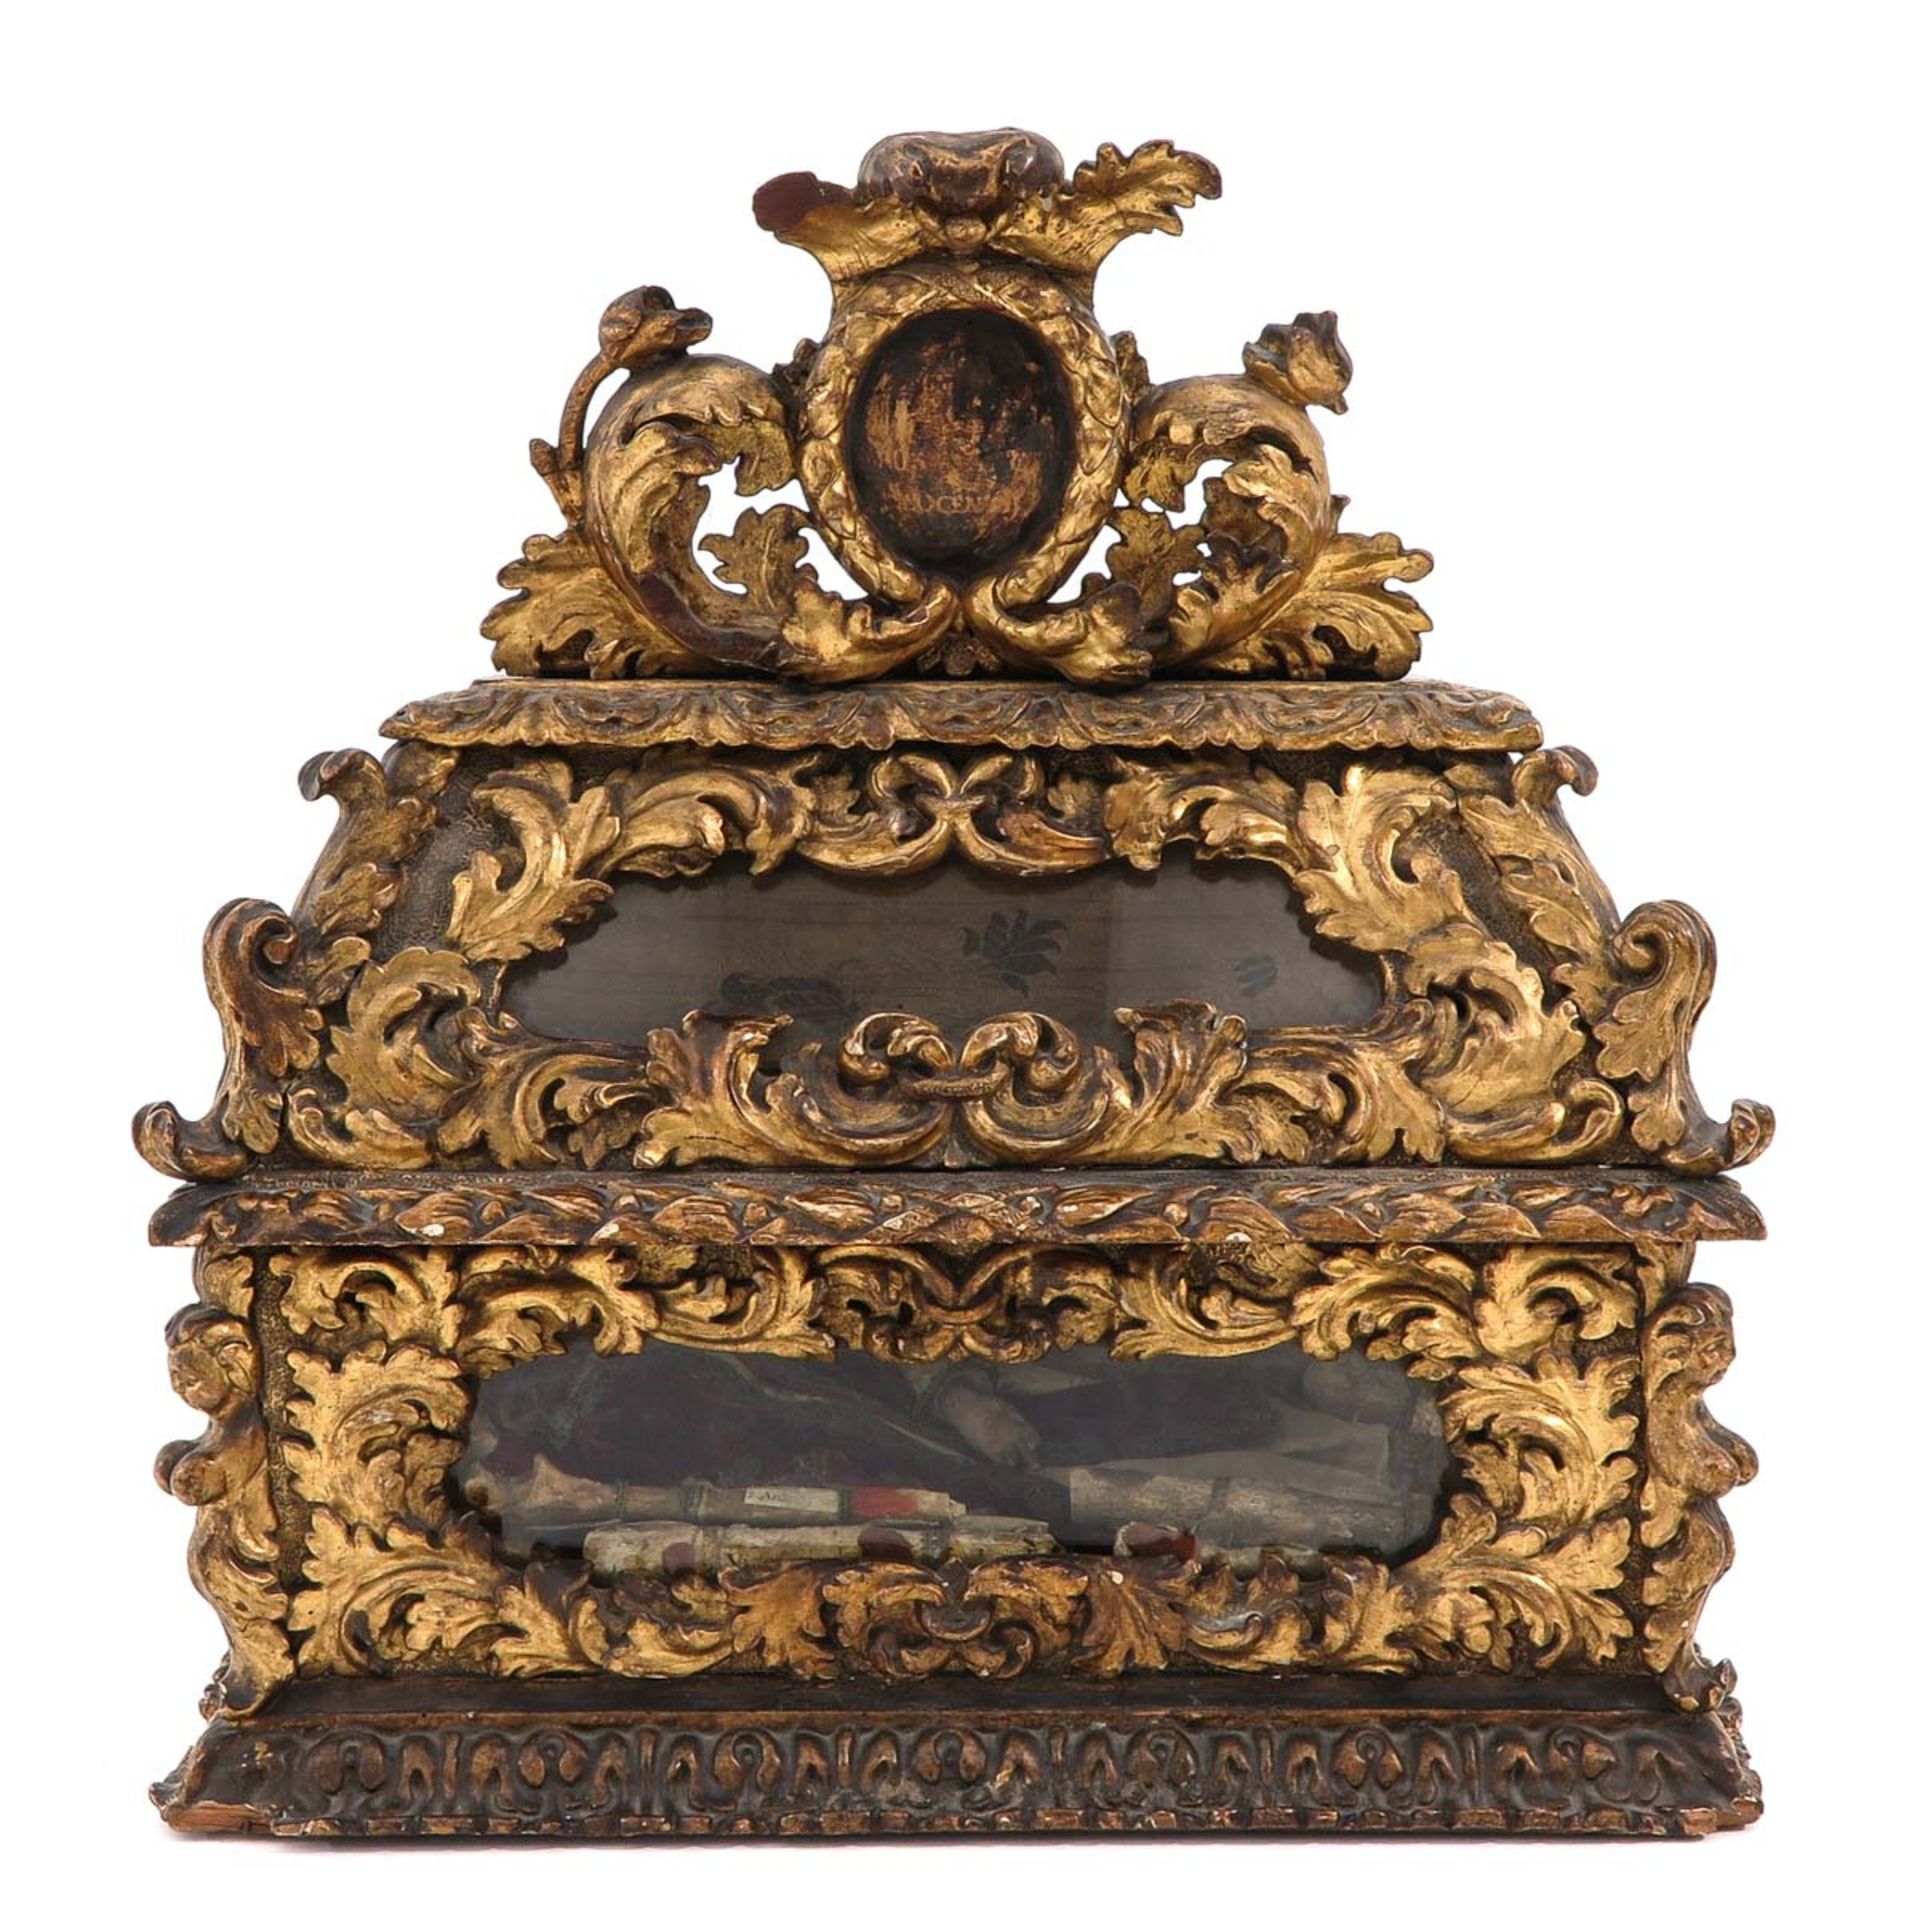 A Beautiful 18th Century Gilt Wood Relic Shrine with Relics